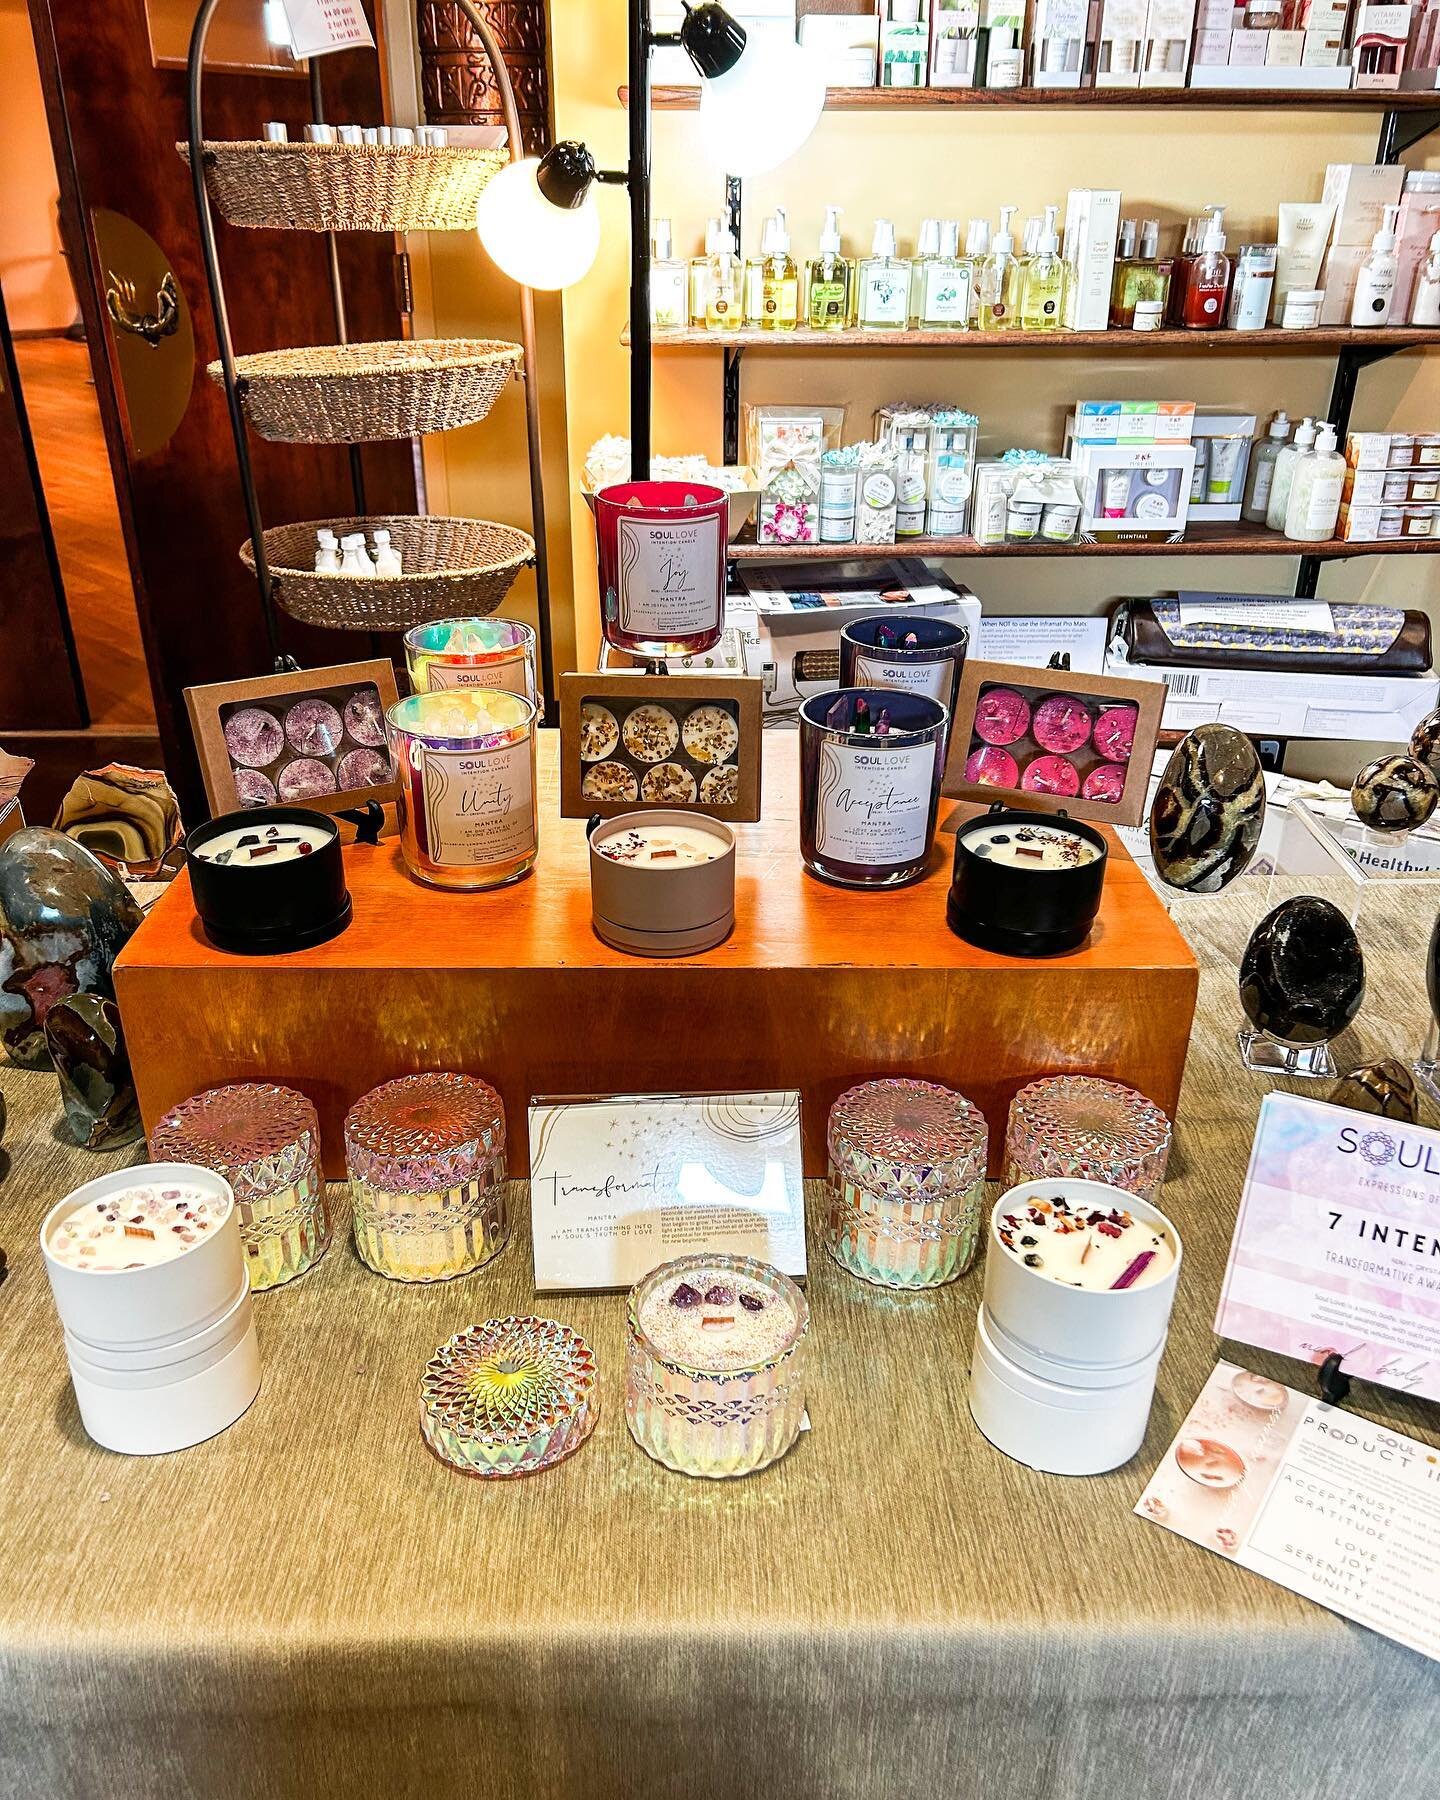 Excited to announce that Soul Love Intention Candles are now being offered at @ahlara_spa_and_boutique in Mooresville, NC!  The Spirit of Ahlara is a Center for Awareness of Mind, Body and Spirit presenting classes and workshops such as meditation, y